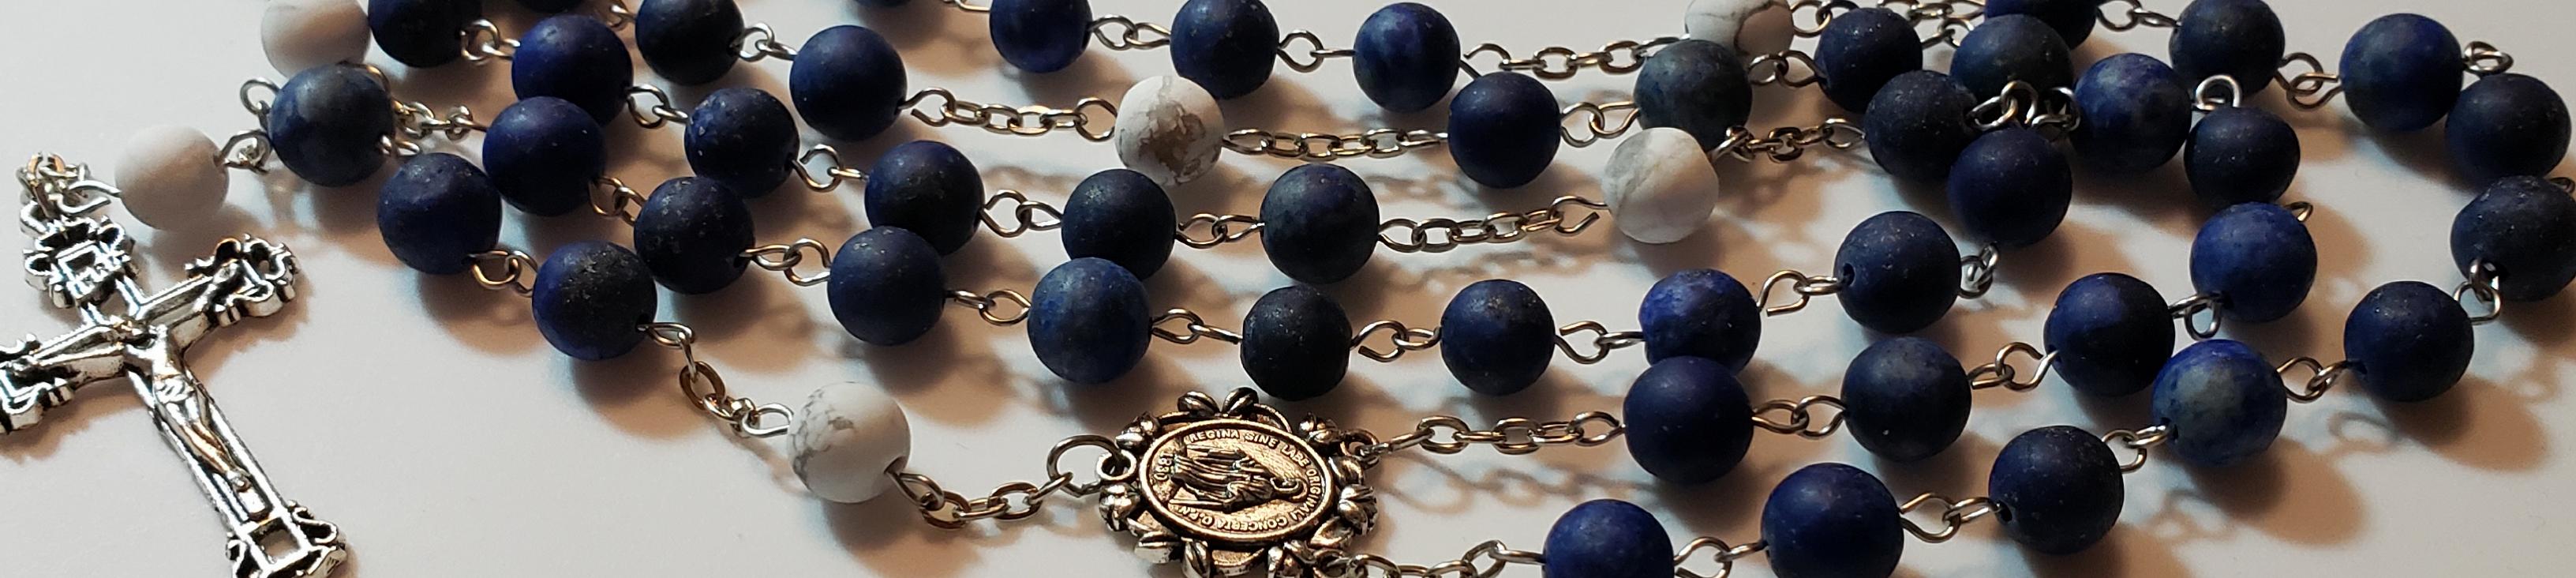 more info about rosary #20